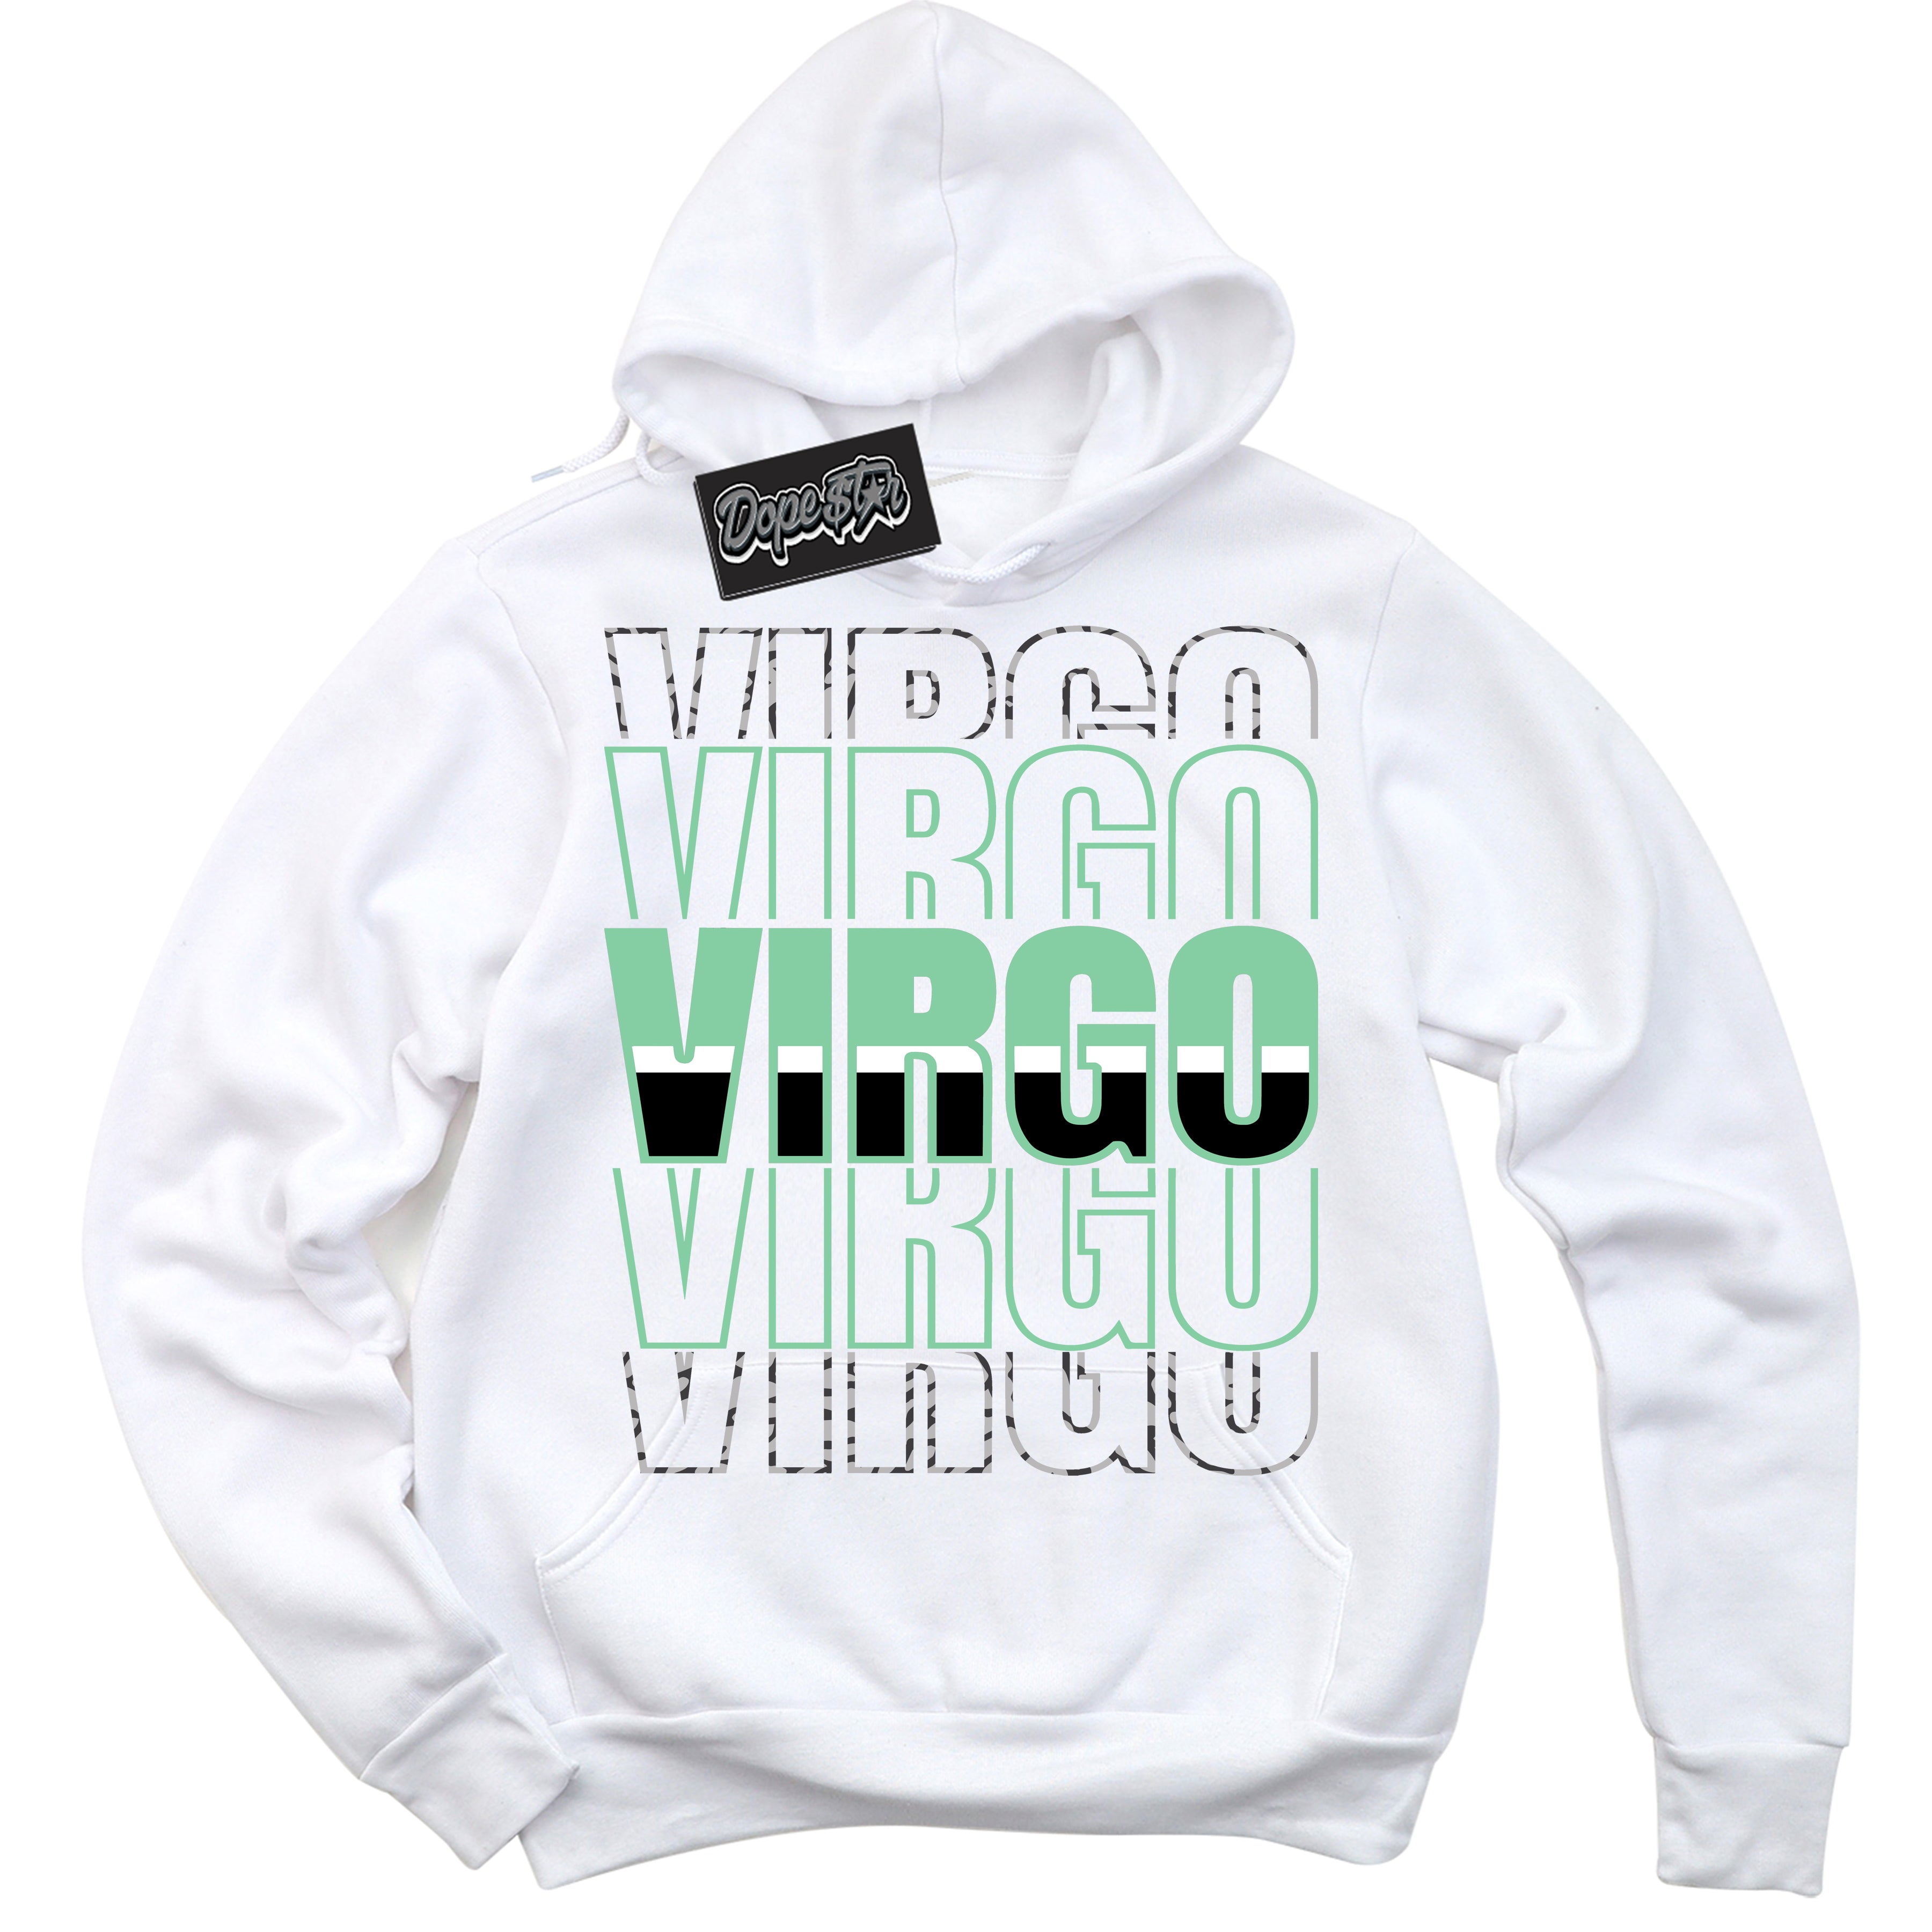 Cool White Graphic DopeStar Hoodie with “ Virgo “ print, that perfectly matches Green Glow 3s sneakers